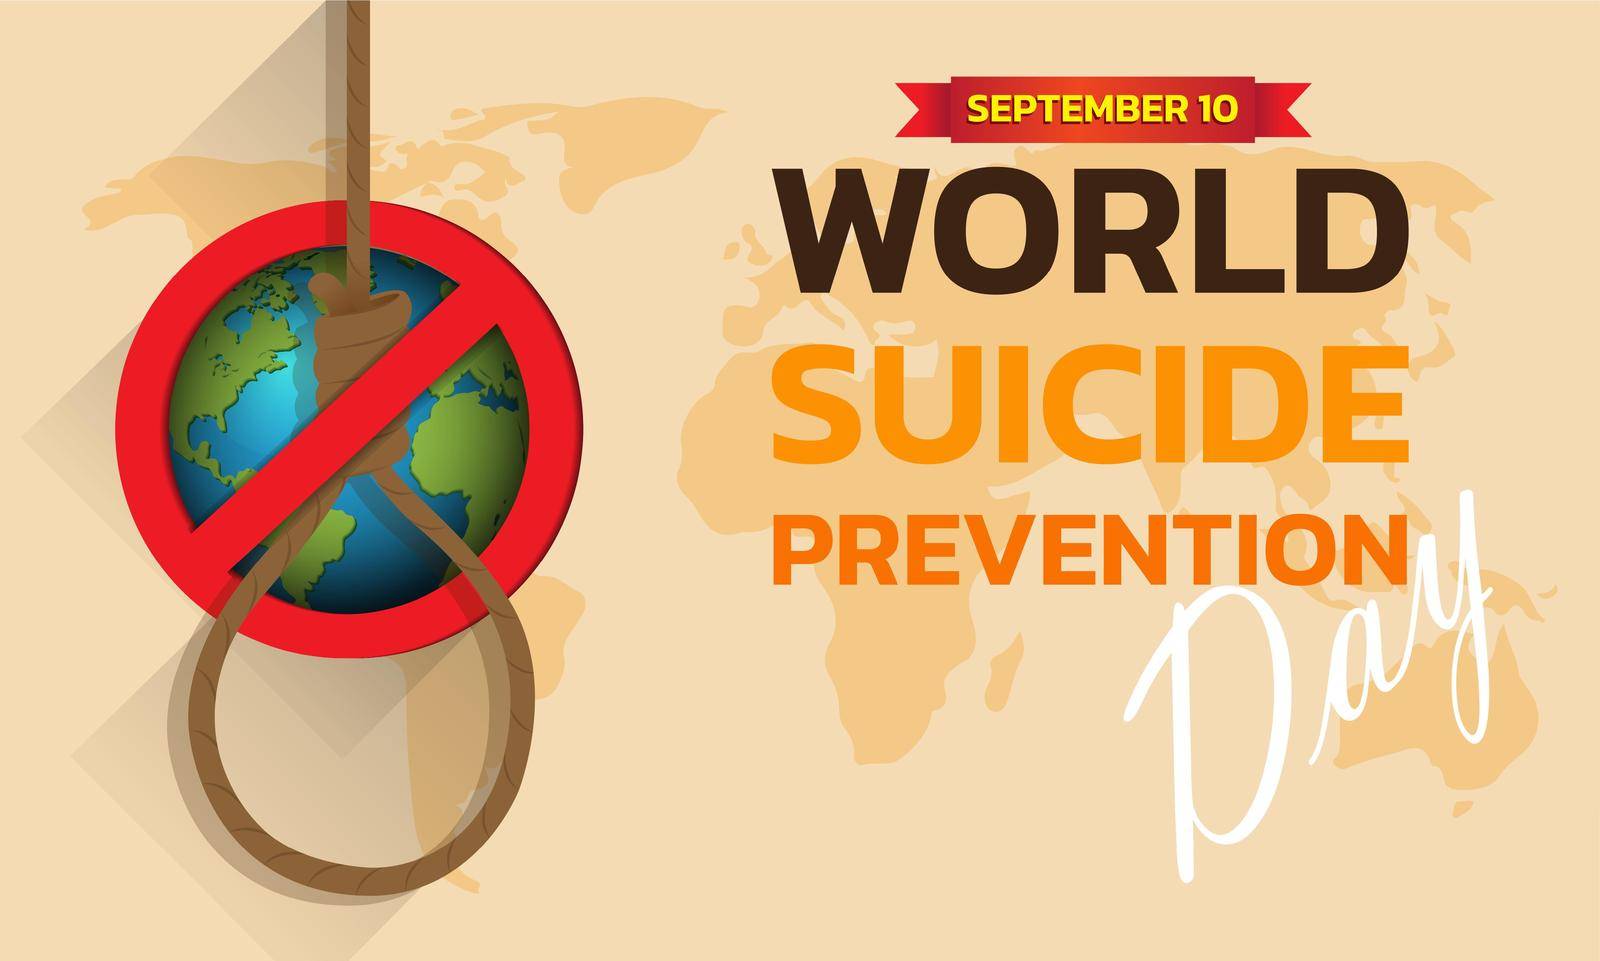 World Suicide Prevention Day concept with awareness ribbon. Design for poster, greeting card, banner, and background.